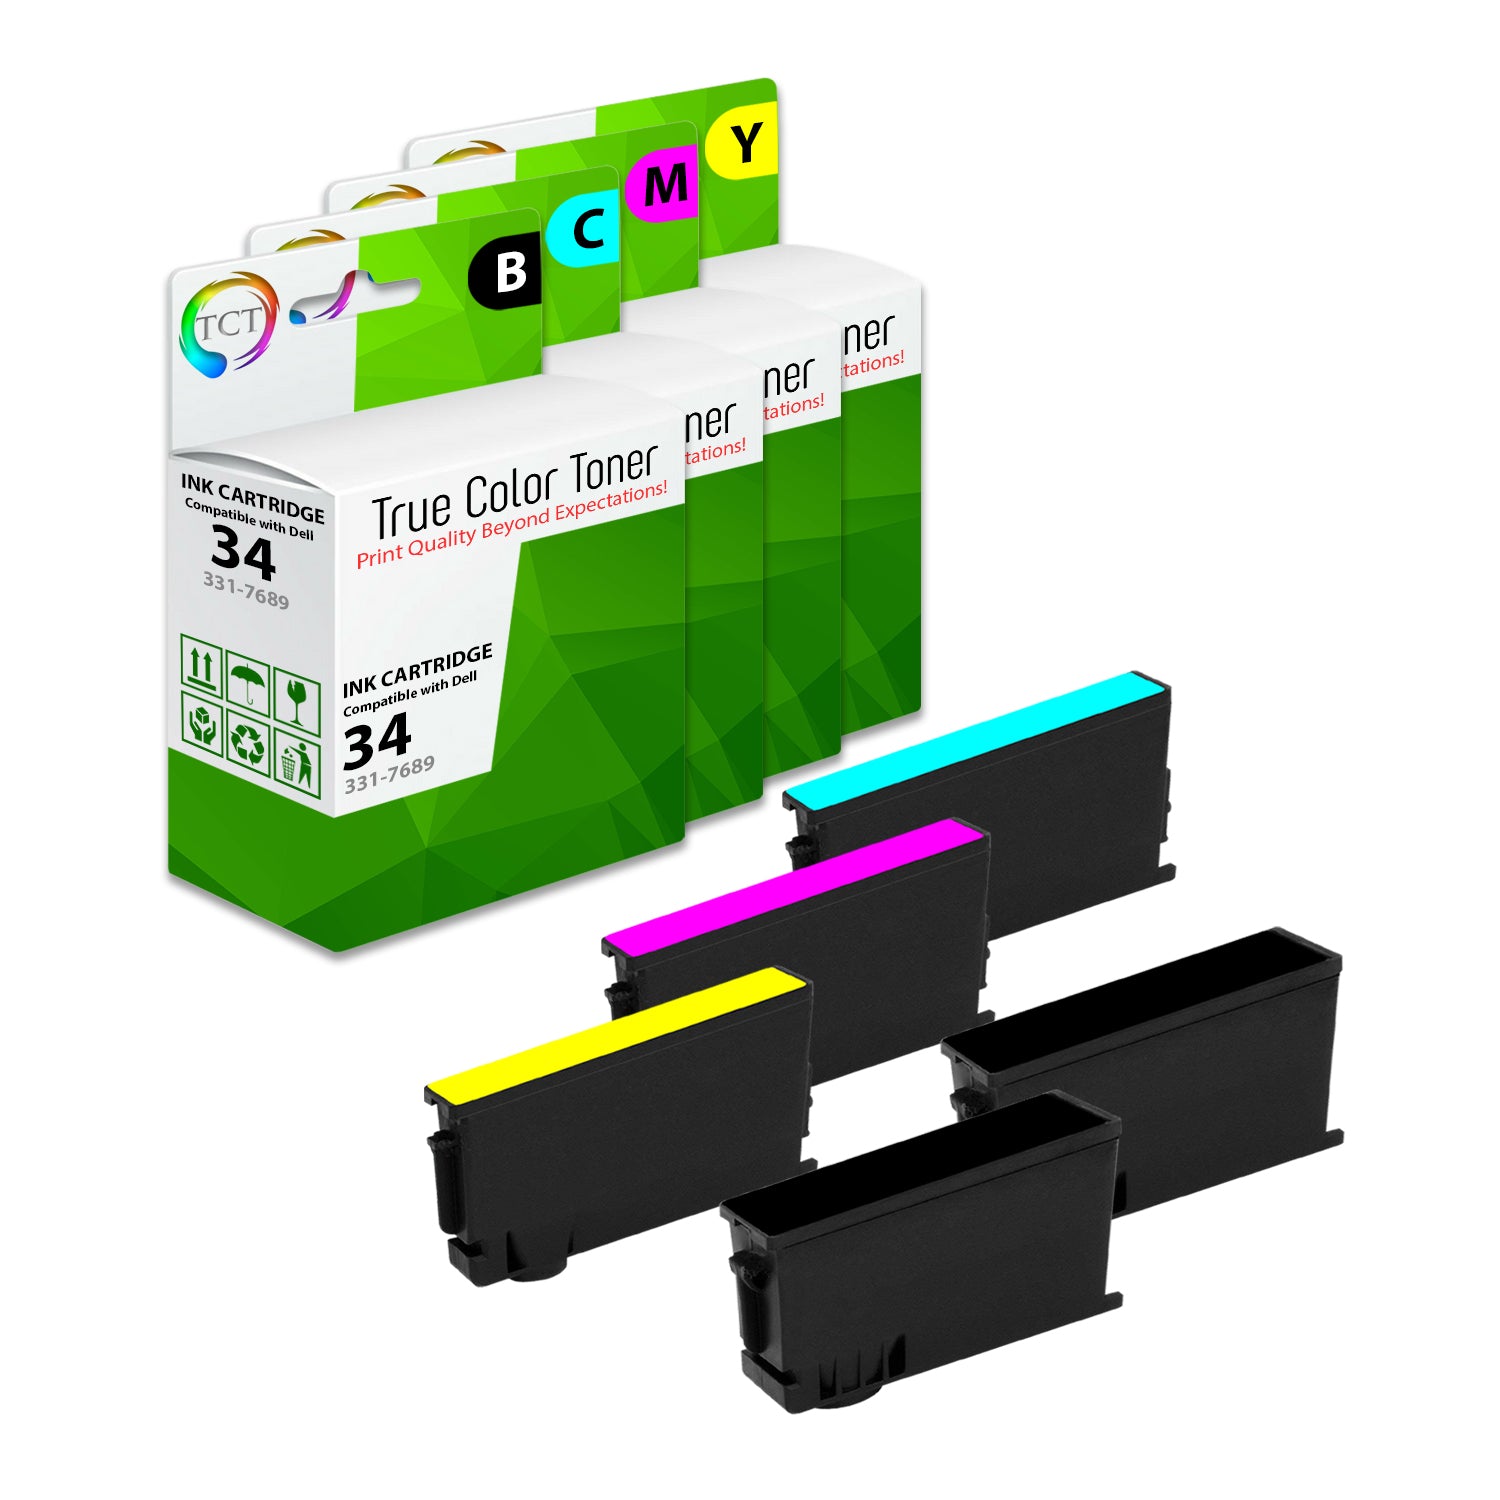 TCT Compatible Ink Cartridge Replacement for the Dell 34 Series Series - 5 Pack (B, C, M, Y)